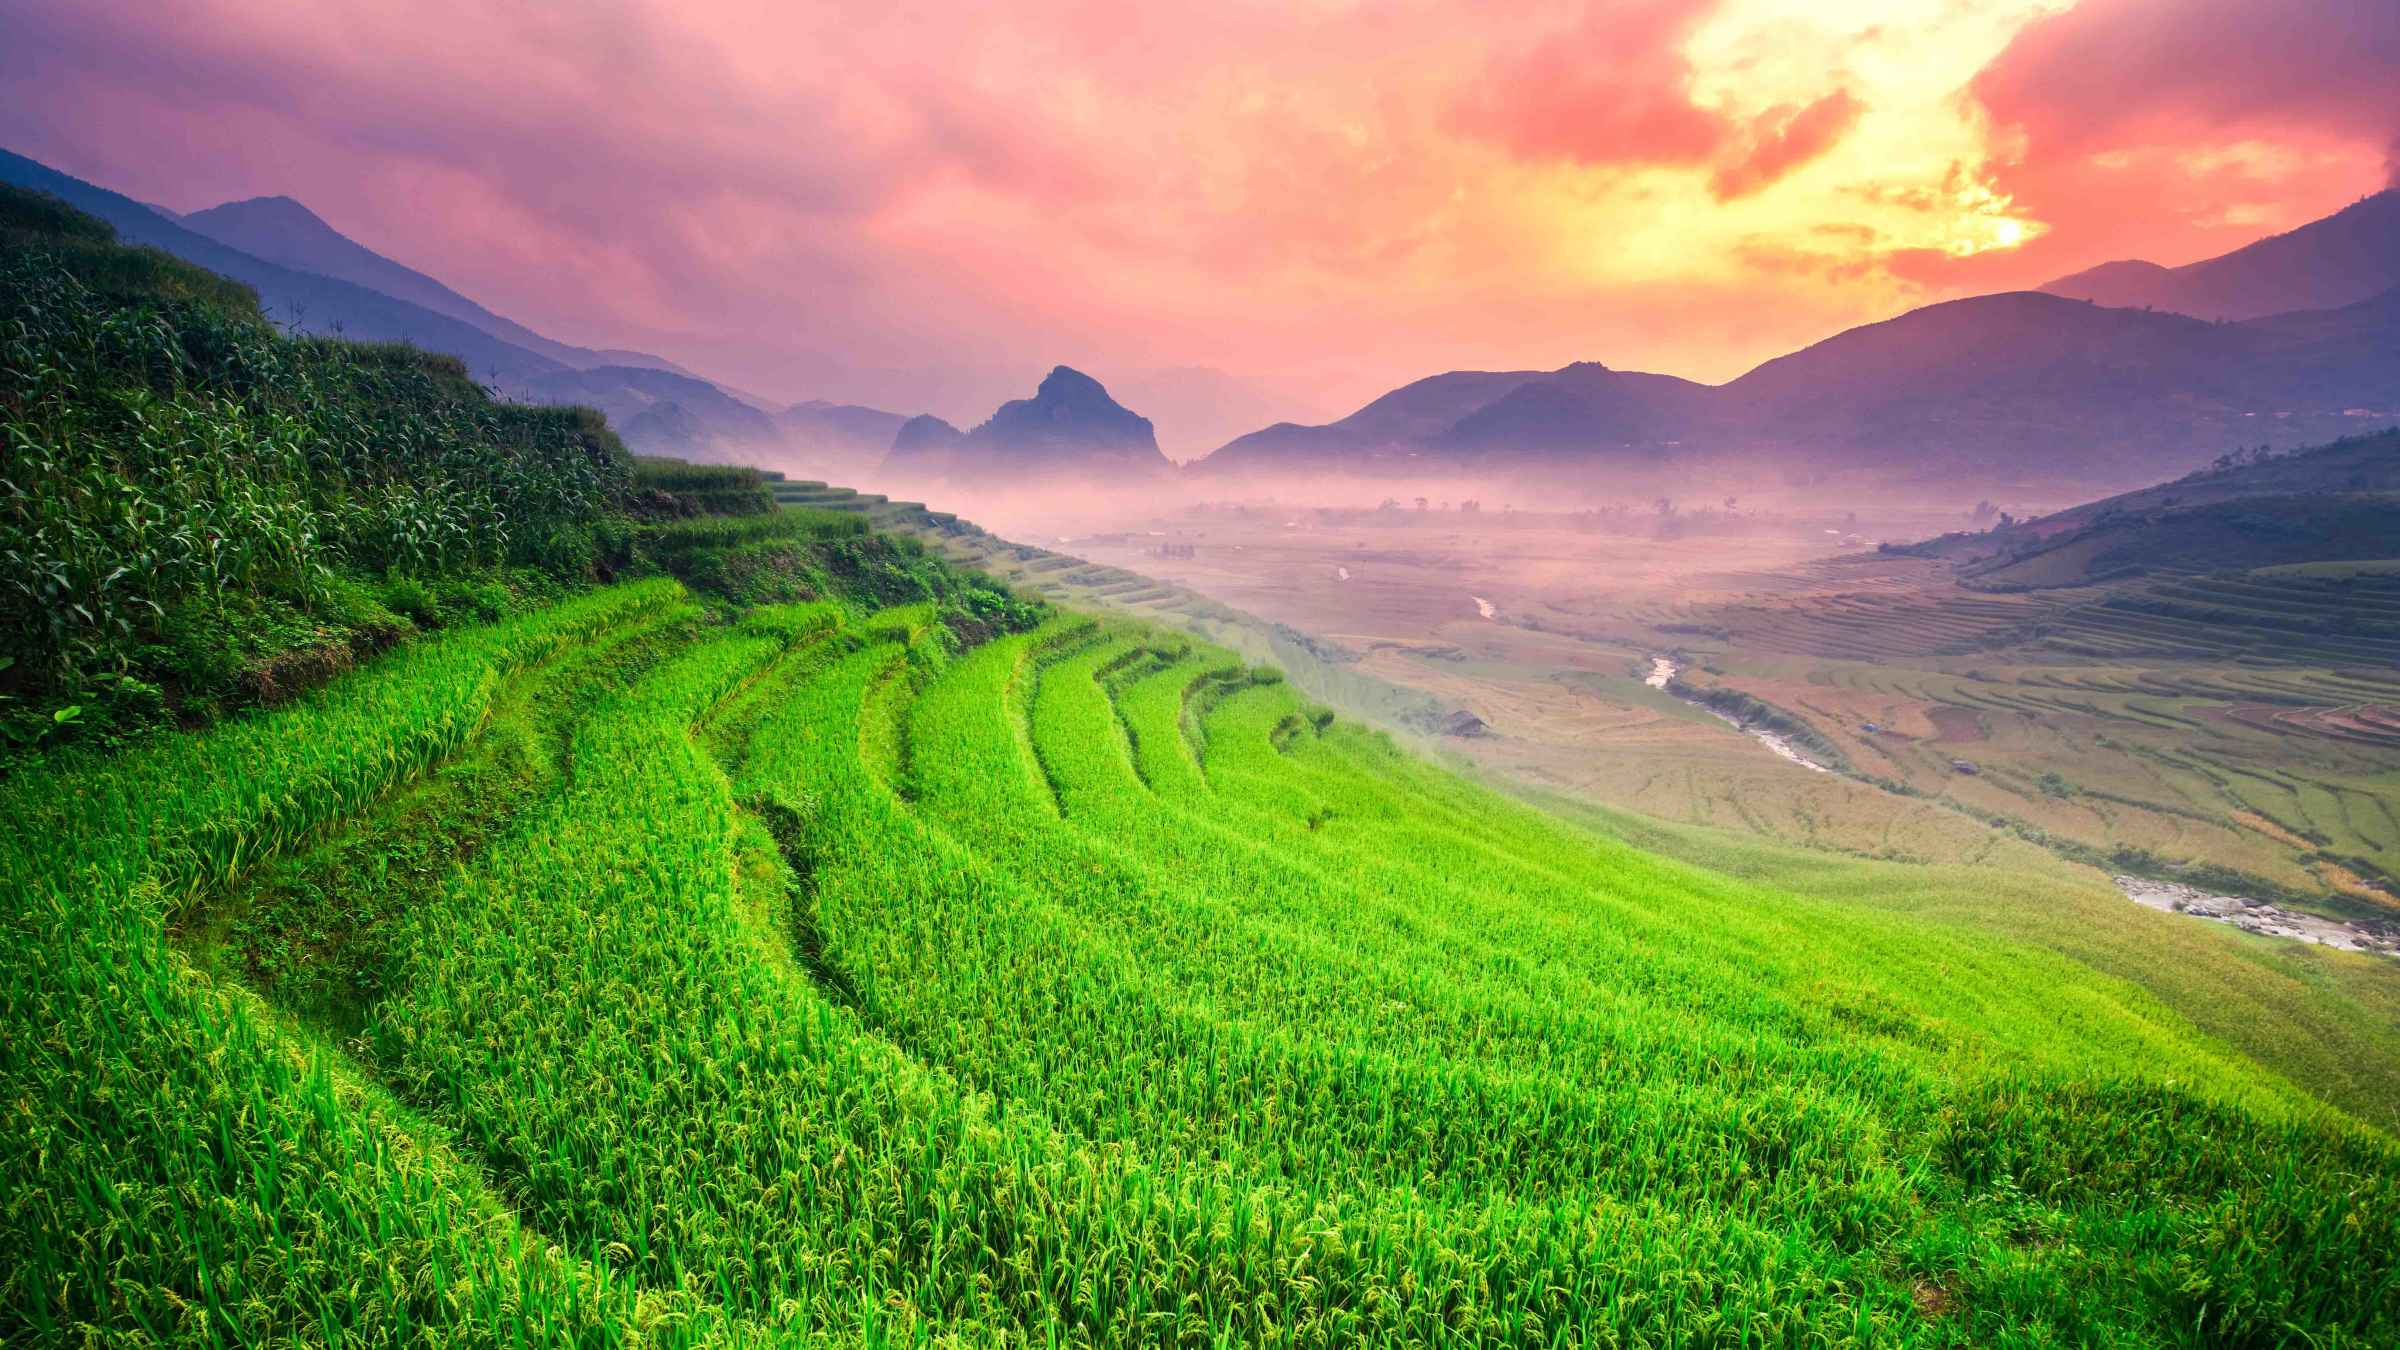 Northern Vietnam 2021 Top 10 Tours And Activities With Photos Things